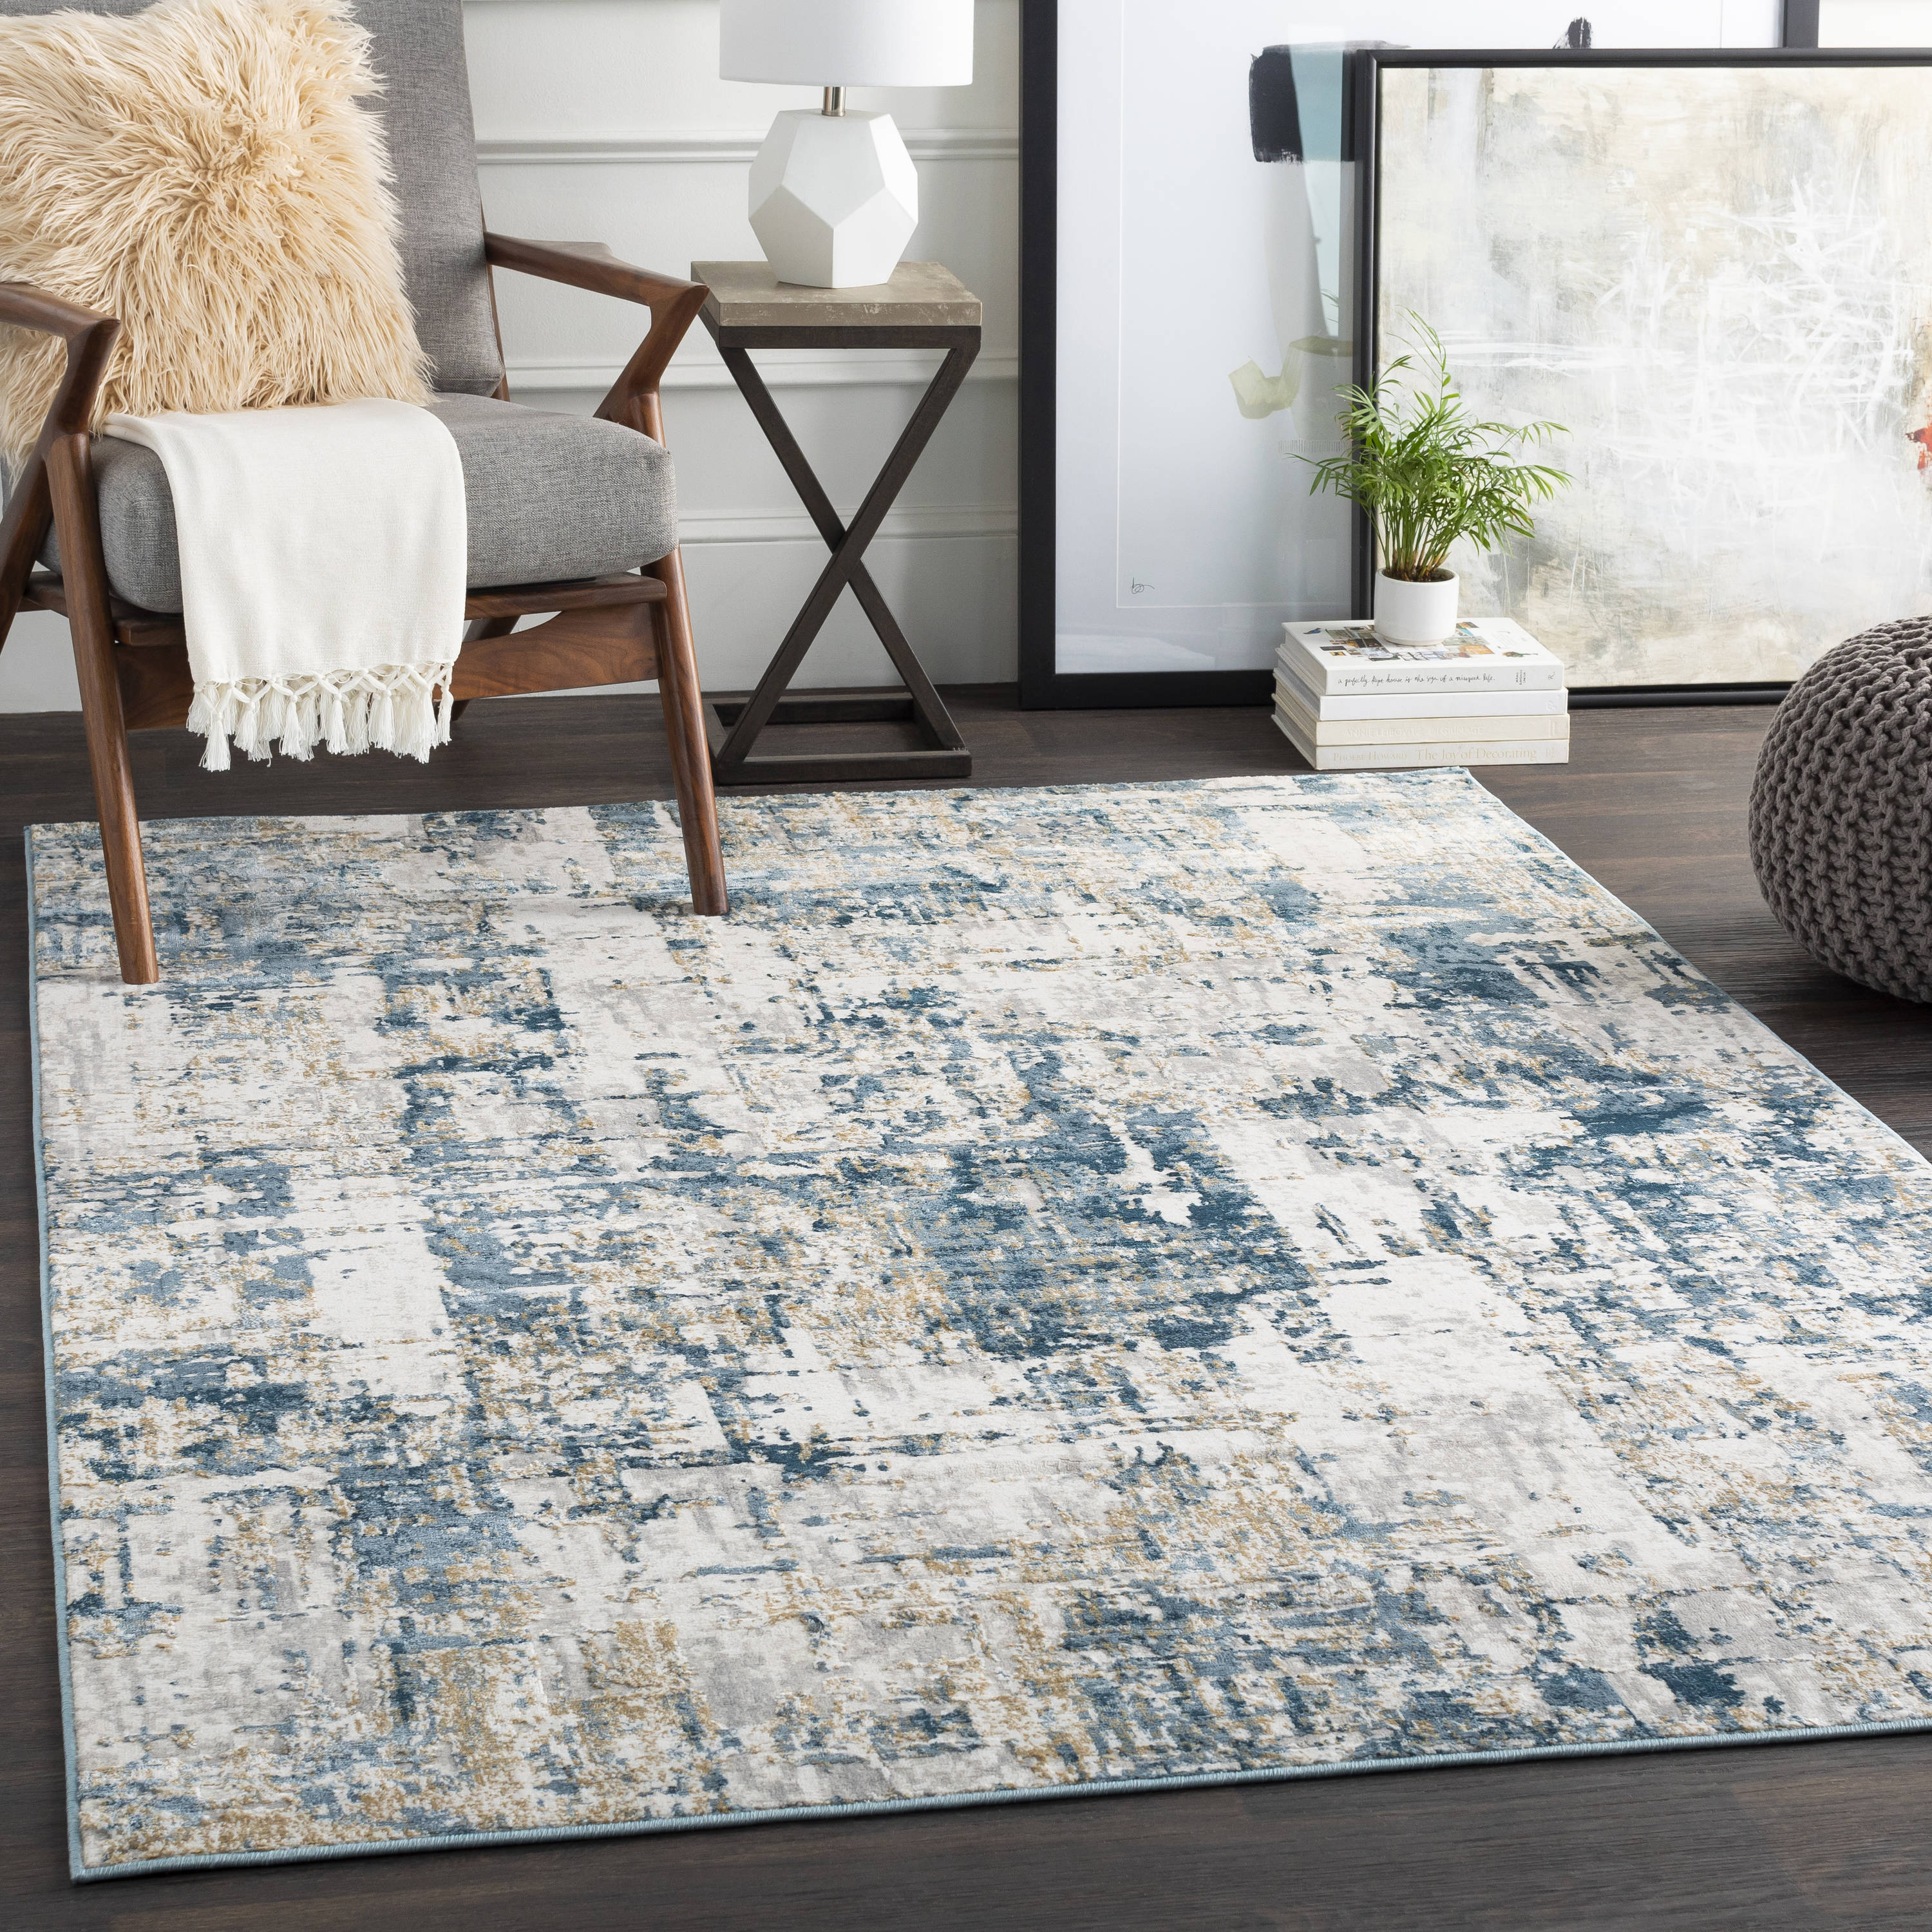 Envy Collection Style 02 Navy Blue Gray Rug Diamond Distressed Pile 5x7 8x11 